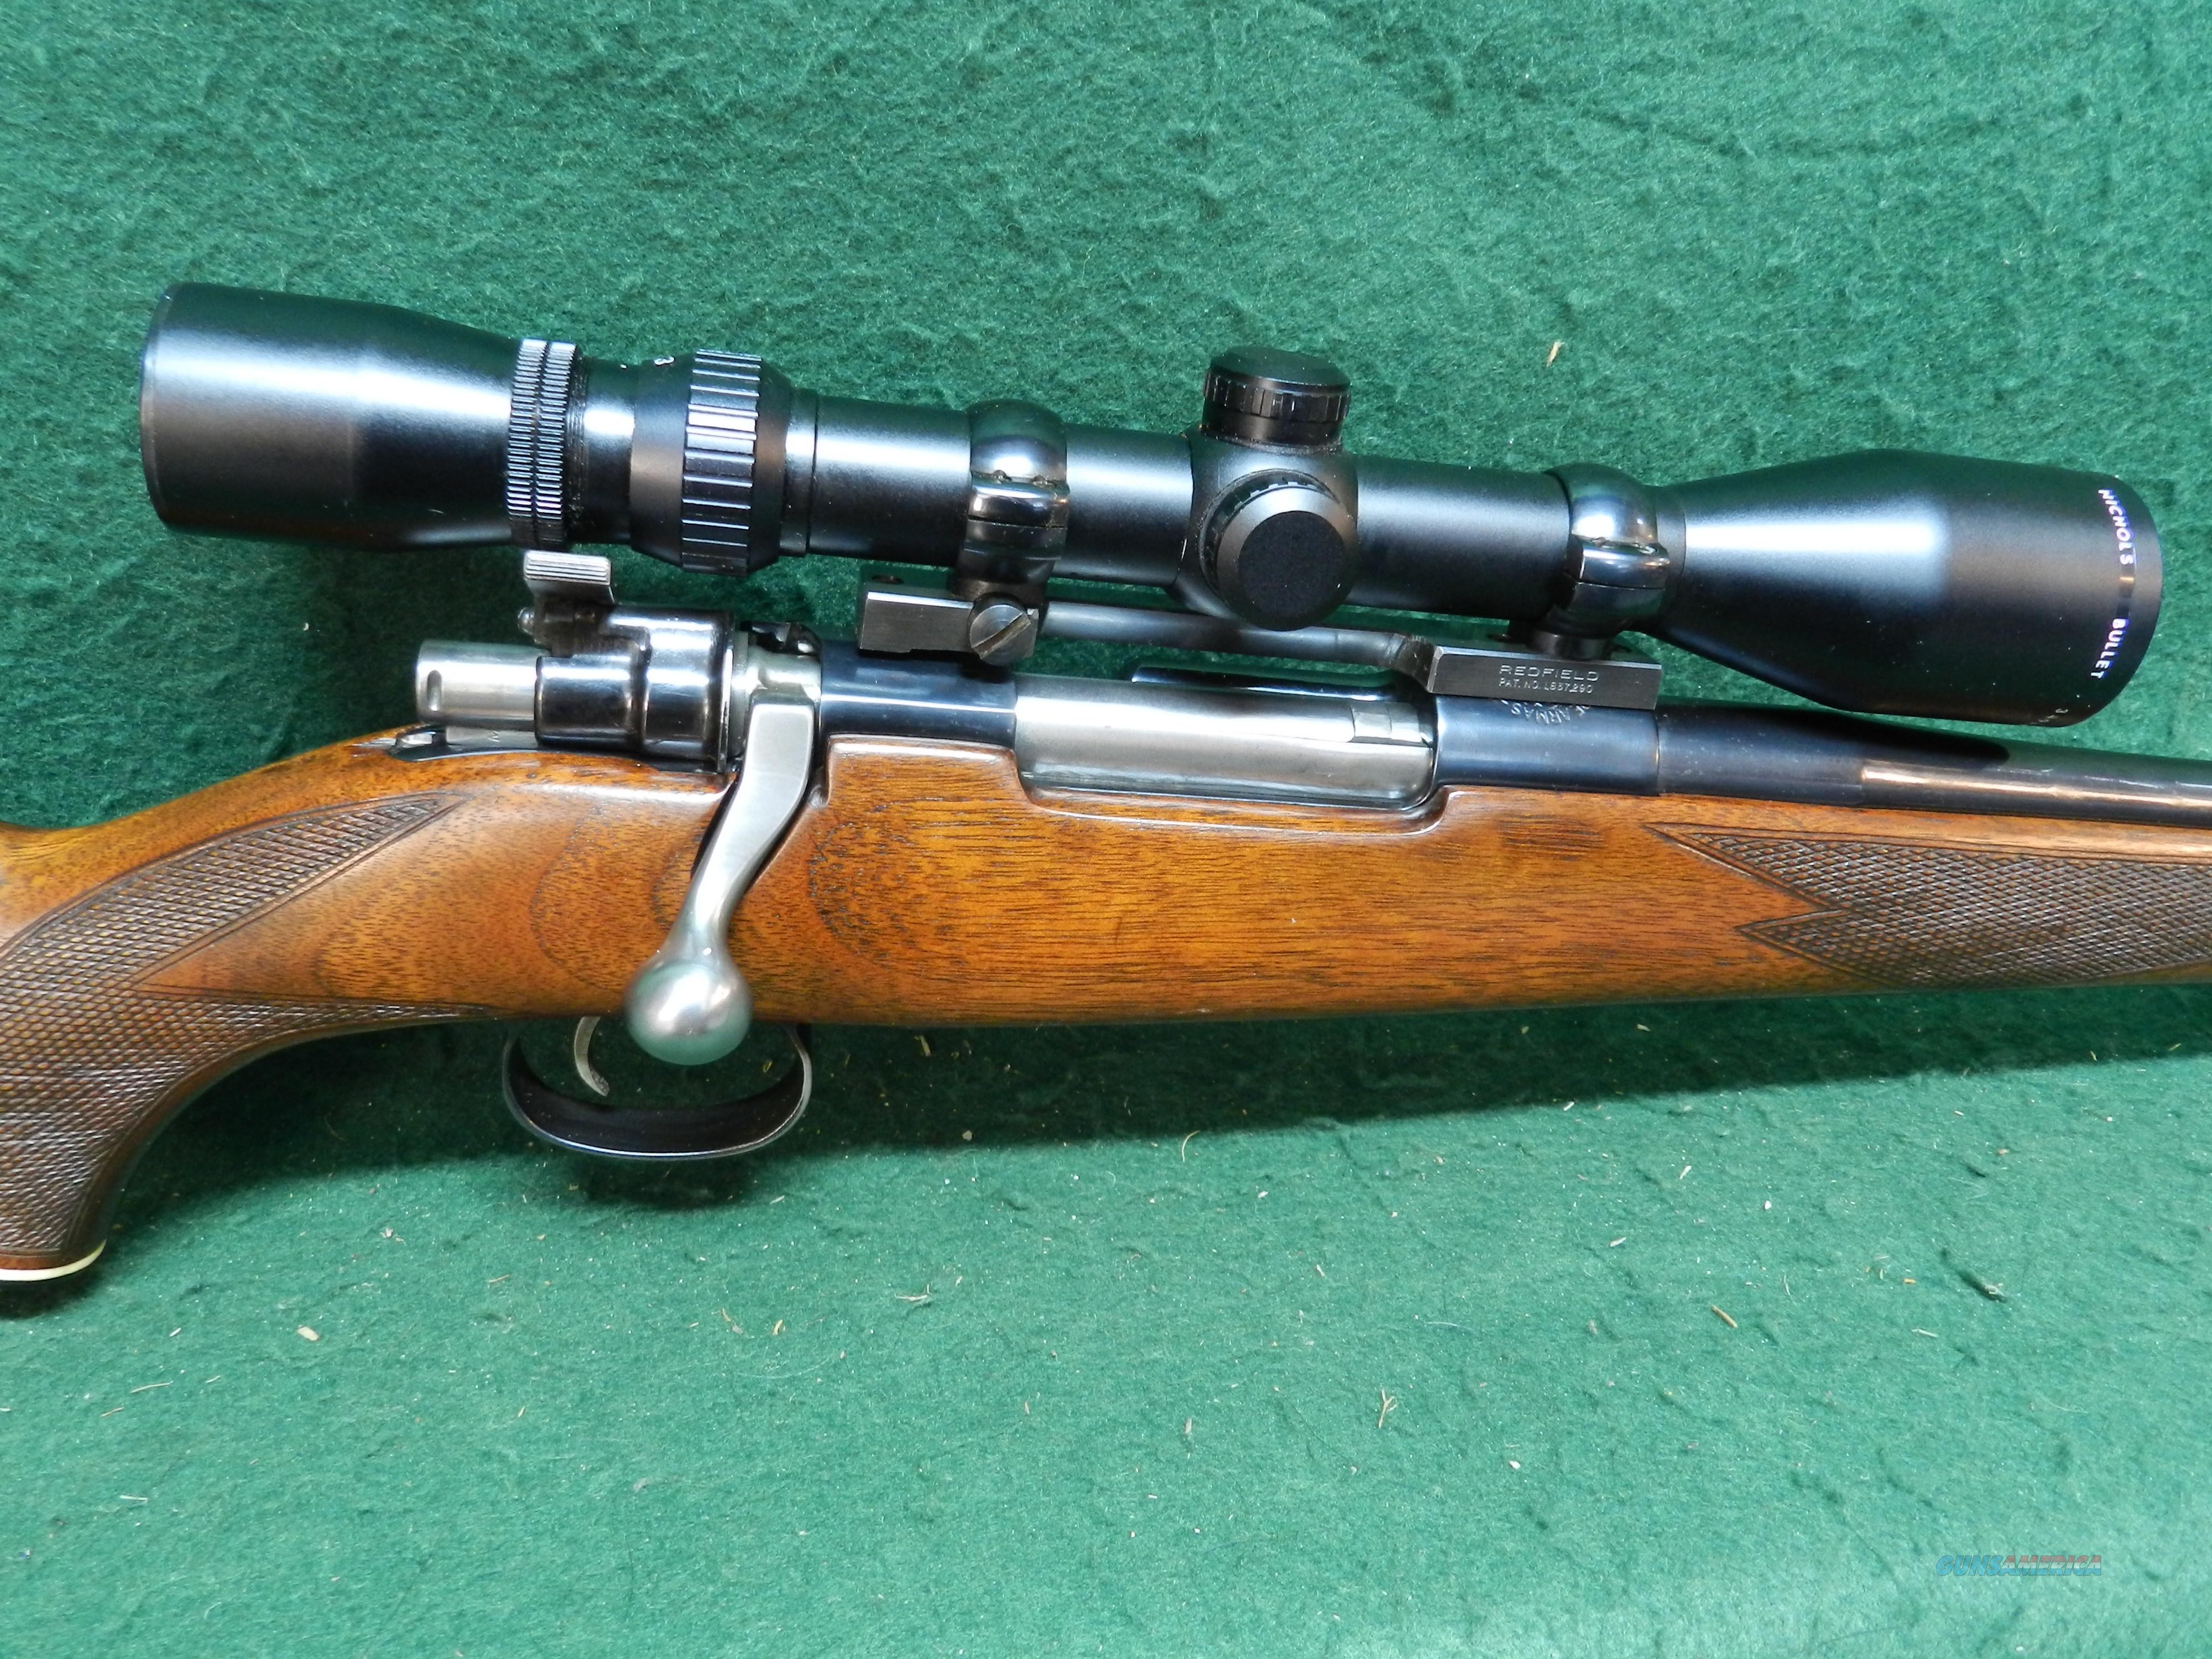 Custom Mauser M98 Rifle in 244 Rem (6mm) for sale